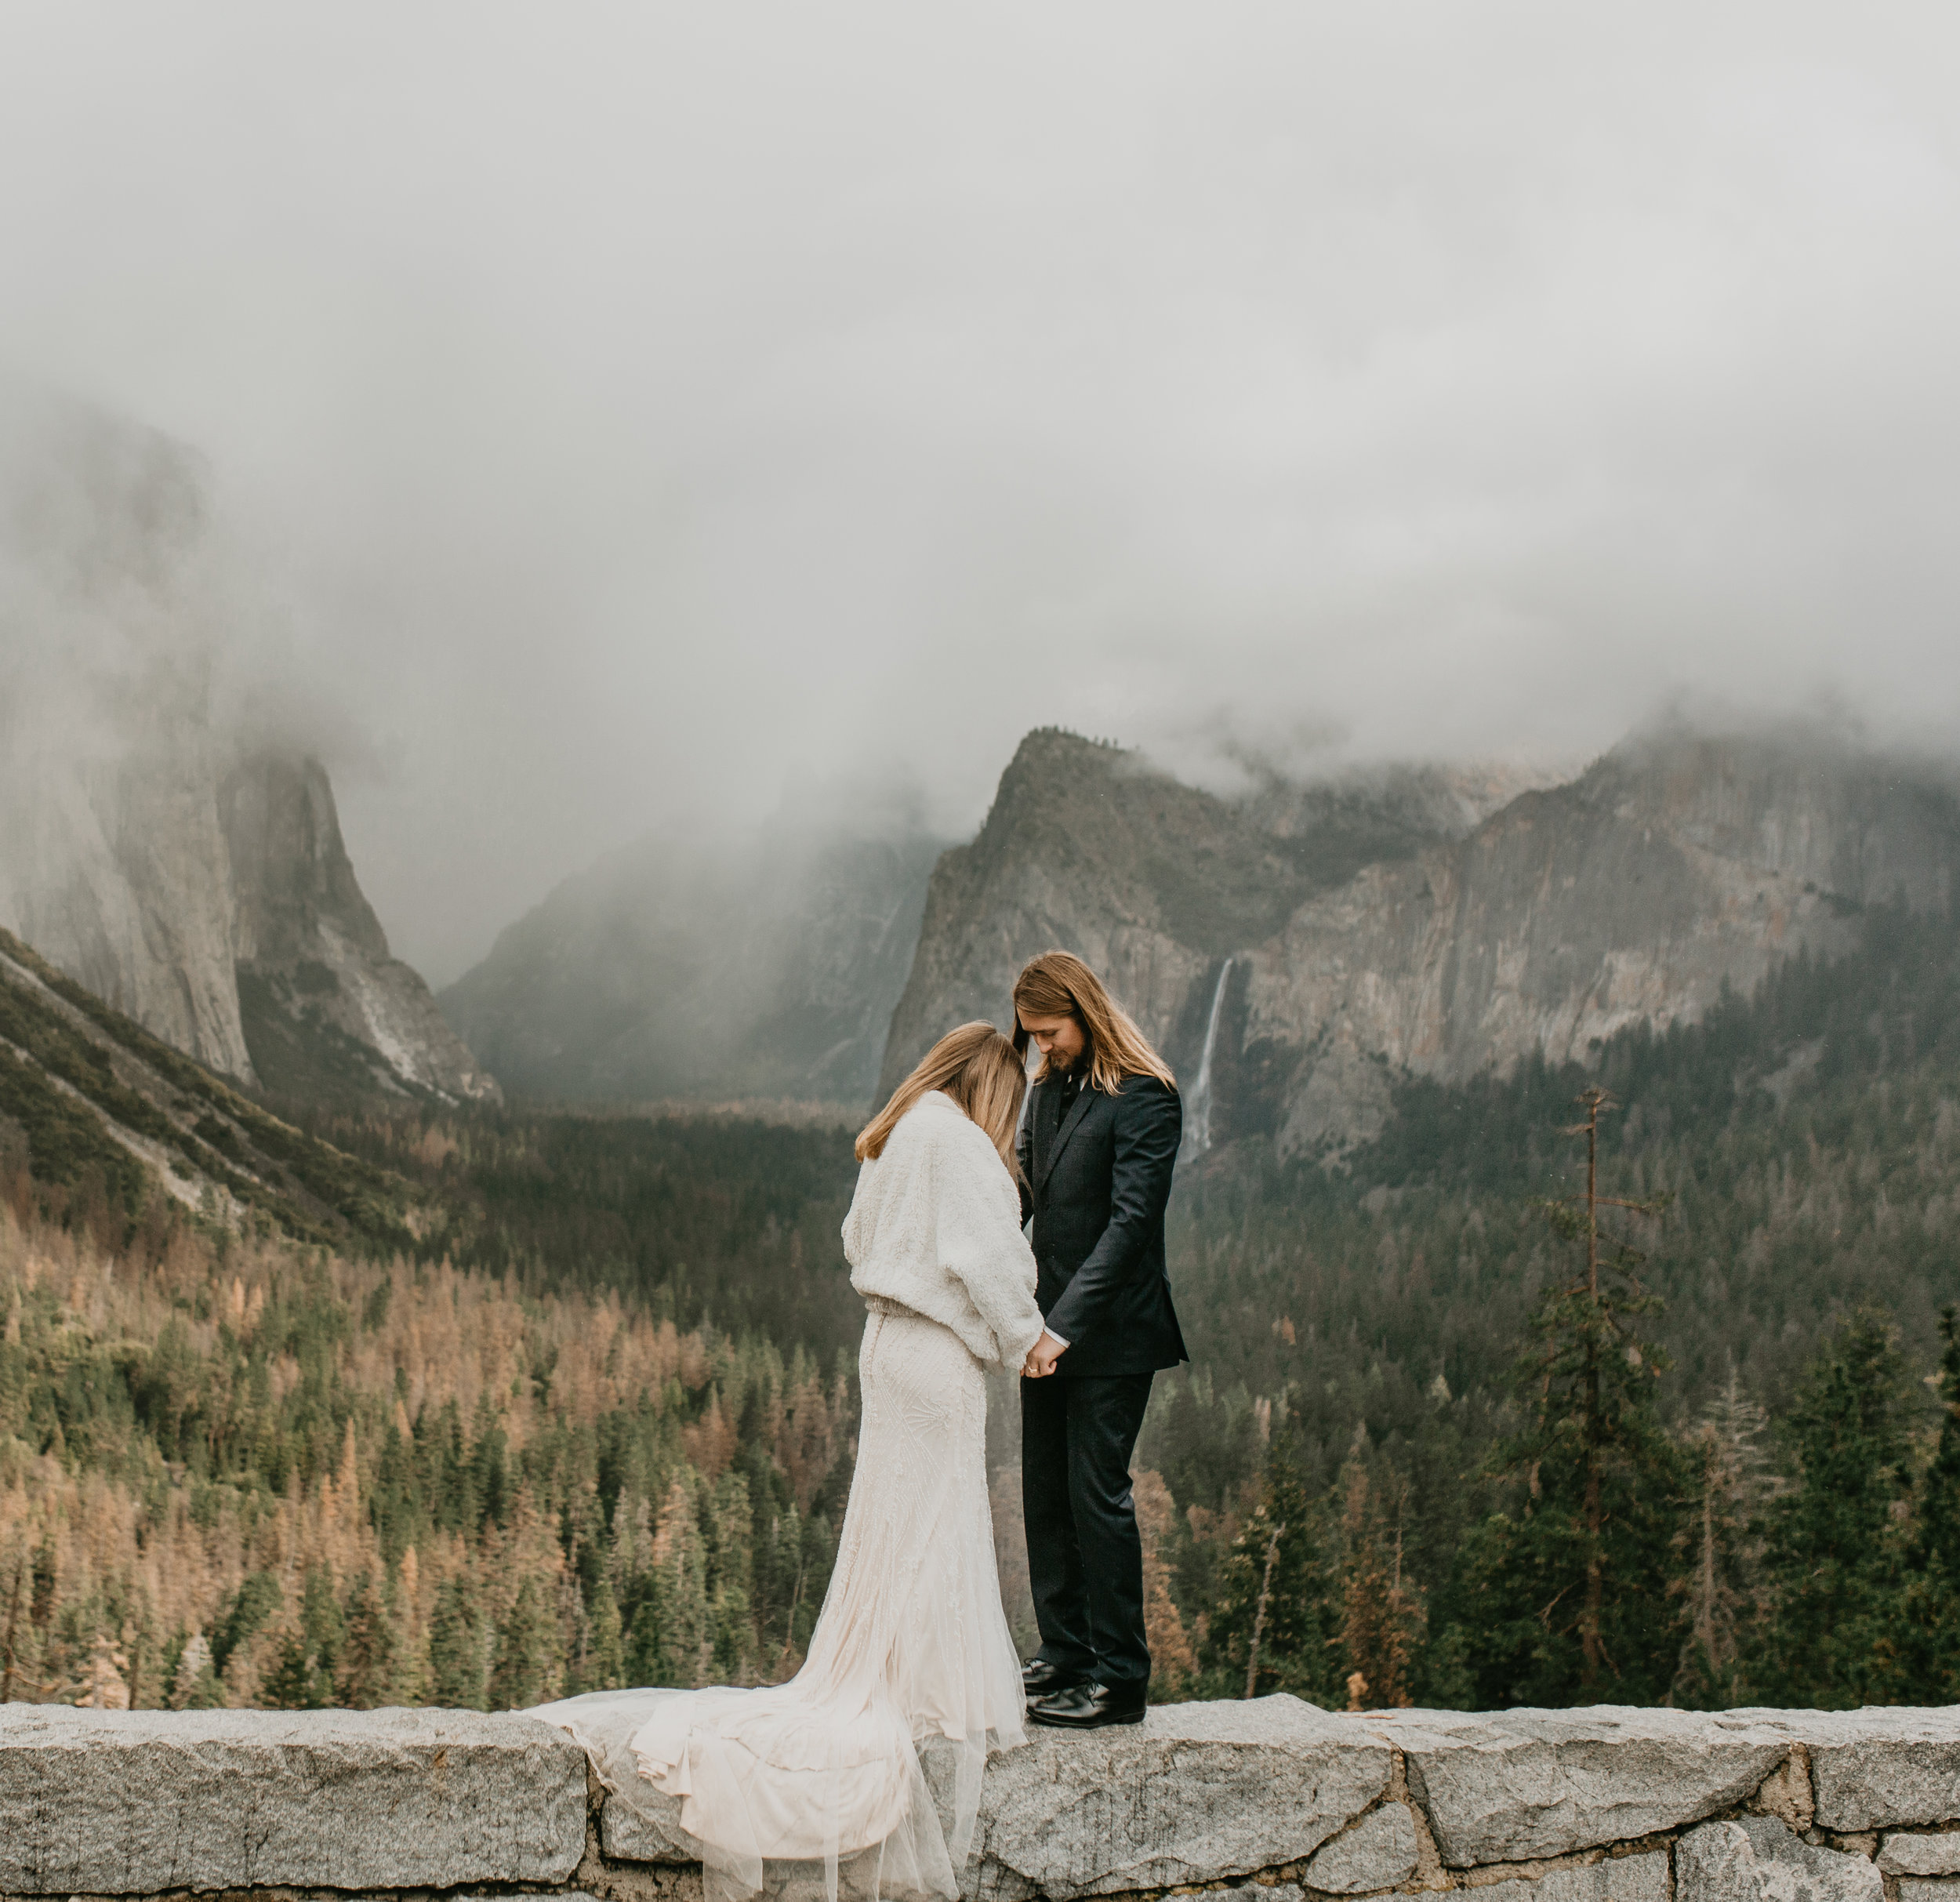 nicole-daacke-photography-yousemite-national-park-elopement-photographer-winter-cloud-moody-elope-inspiration-yosemite-valley-tunnel-view-winter-cloud-fog-weather-wedding-photos-10.jpg